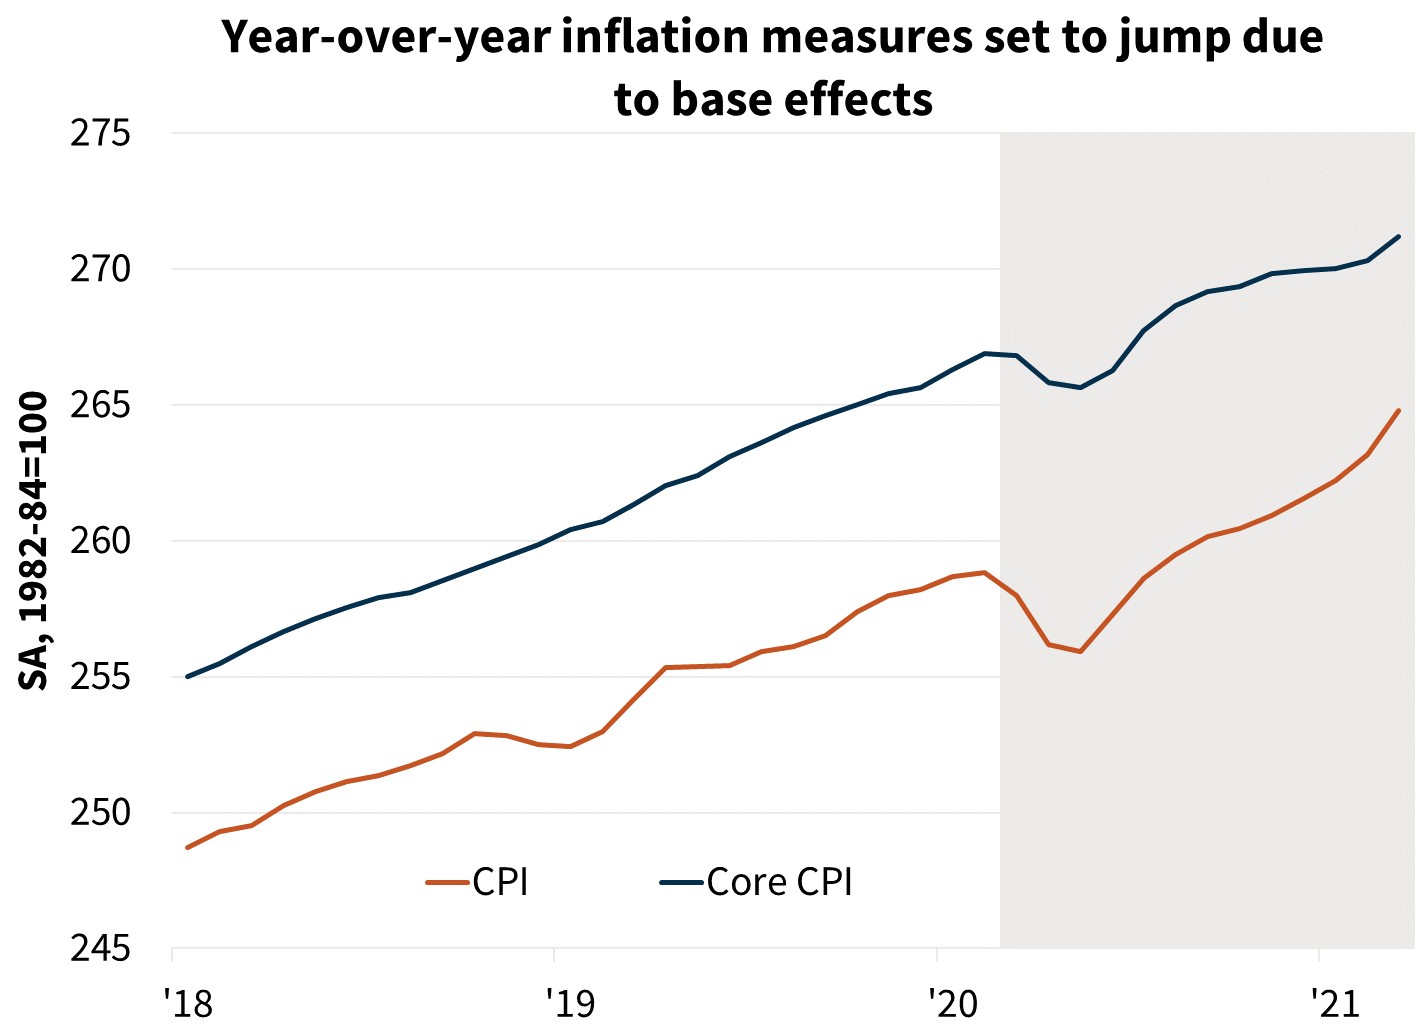  Year-over-year inflation measures set to jump due to base effects
